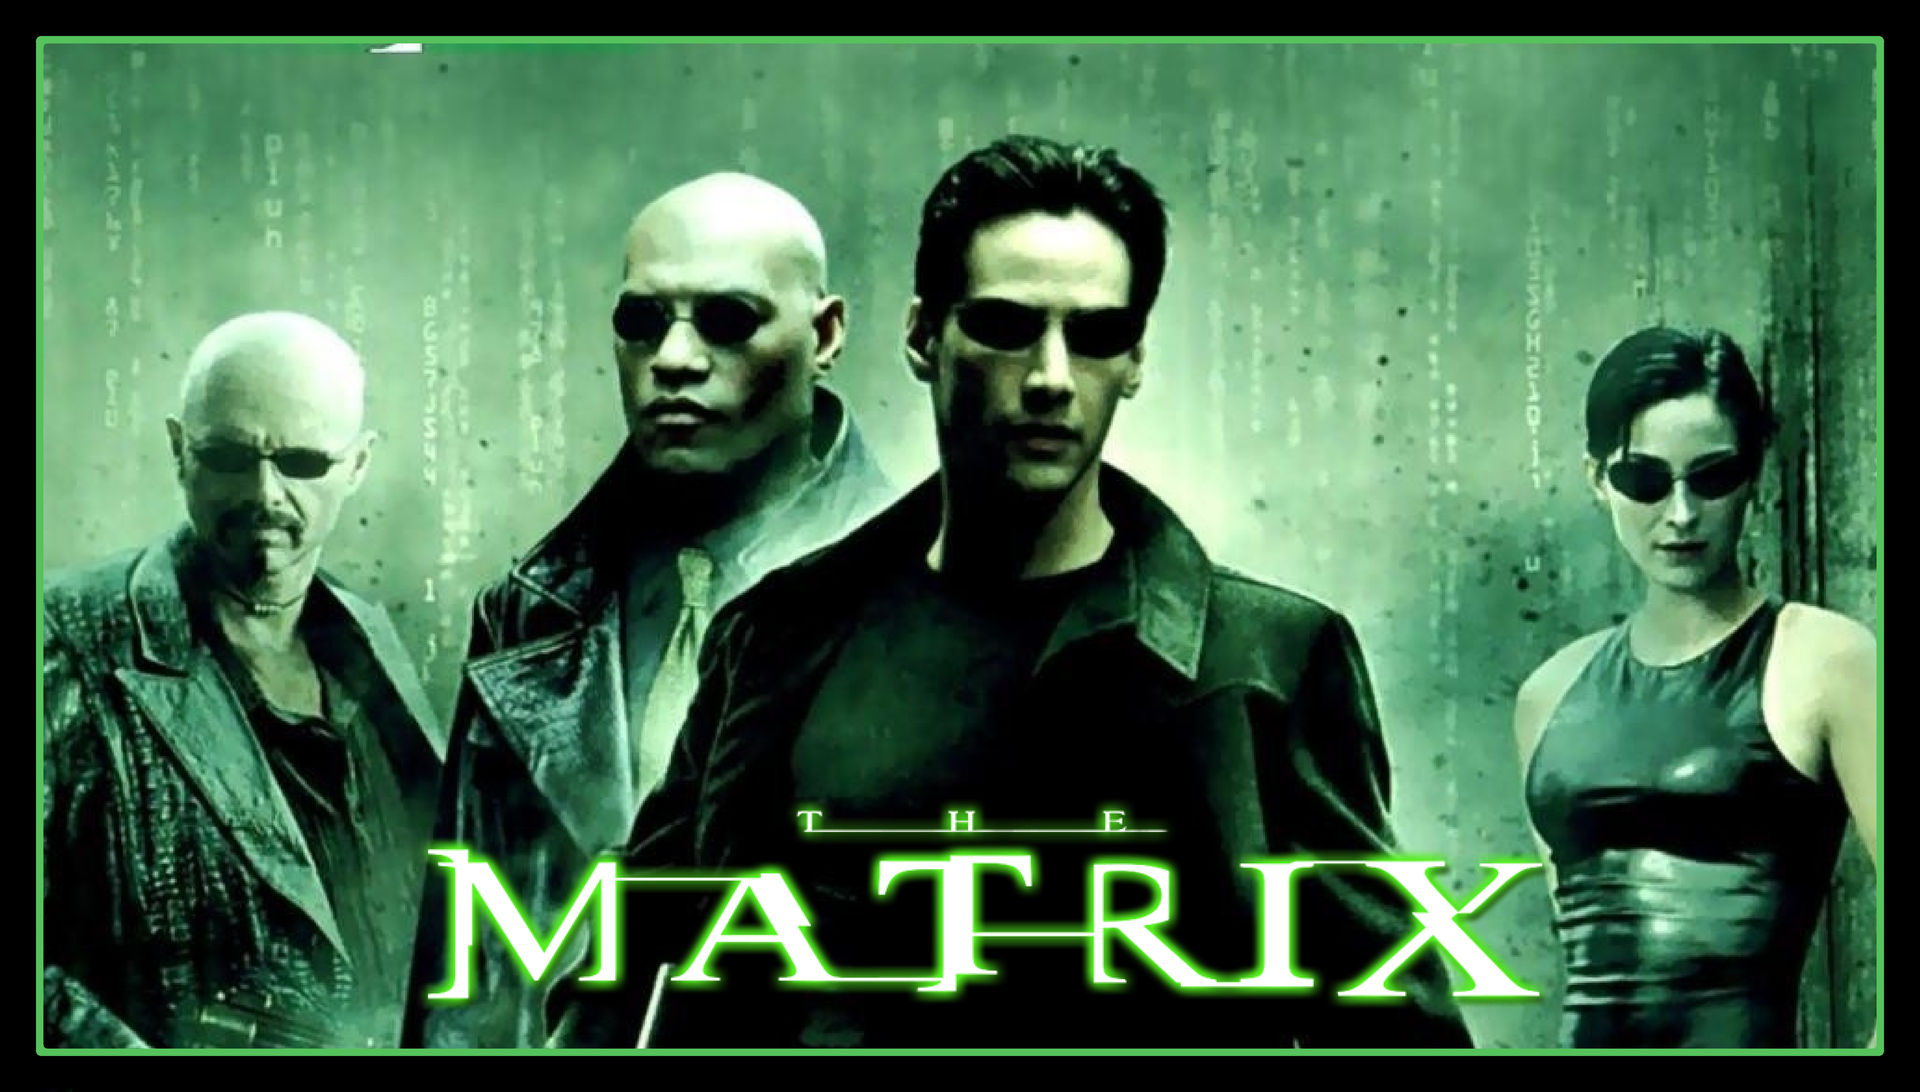 title movie art for The Matrix with main characters